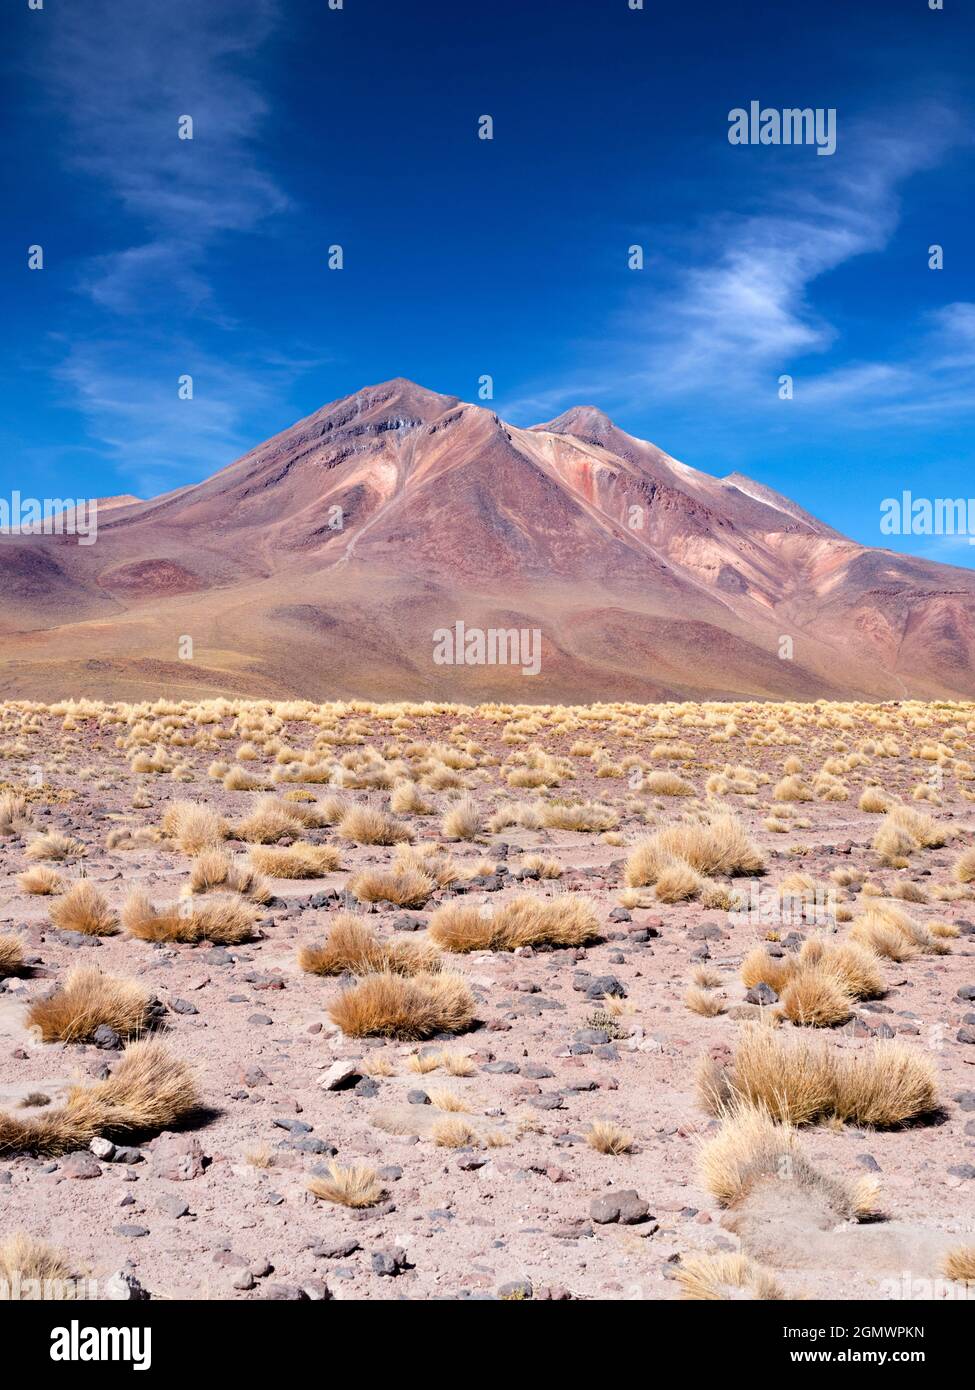 Chilean Altiplano, Chile - 26 May 2018   The Chilean Altiplano  is high, dry, oxygen starved and seared by UV radiation. Not nice. But here it offers Stock Photo